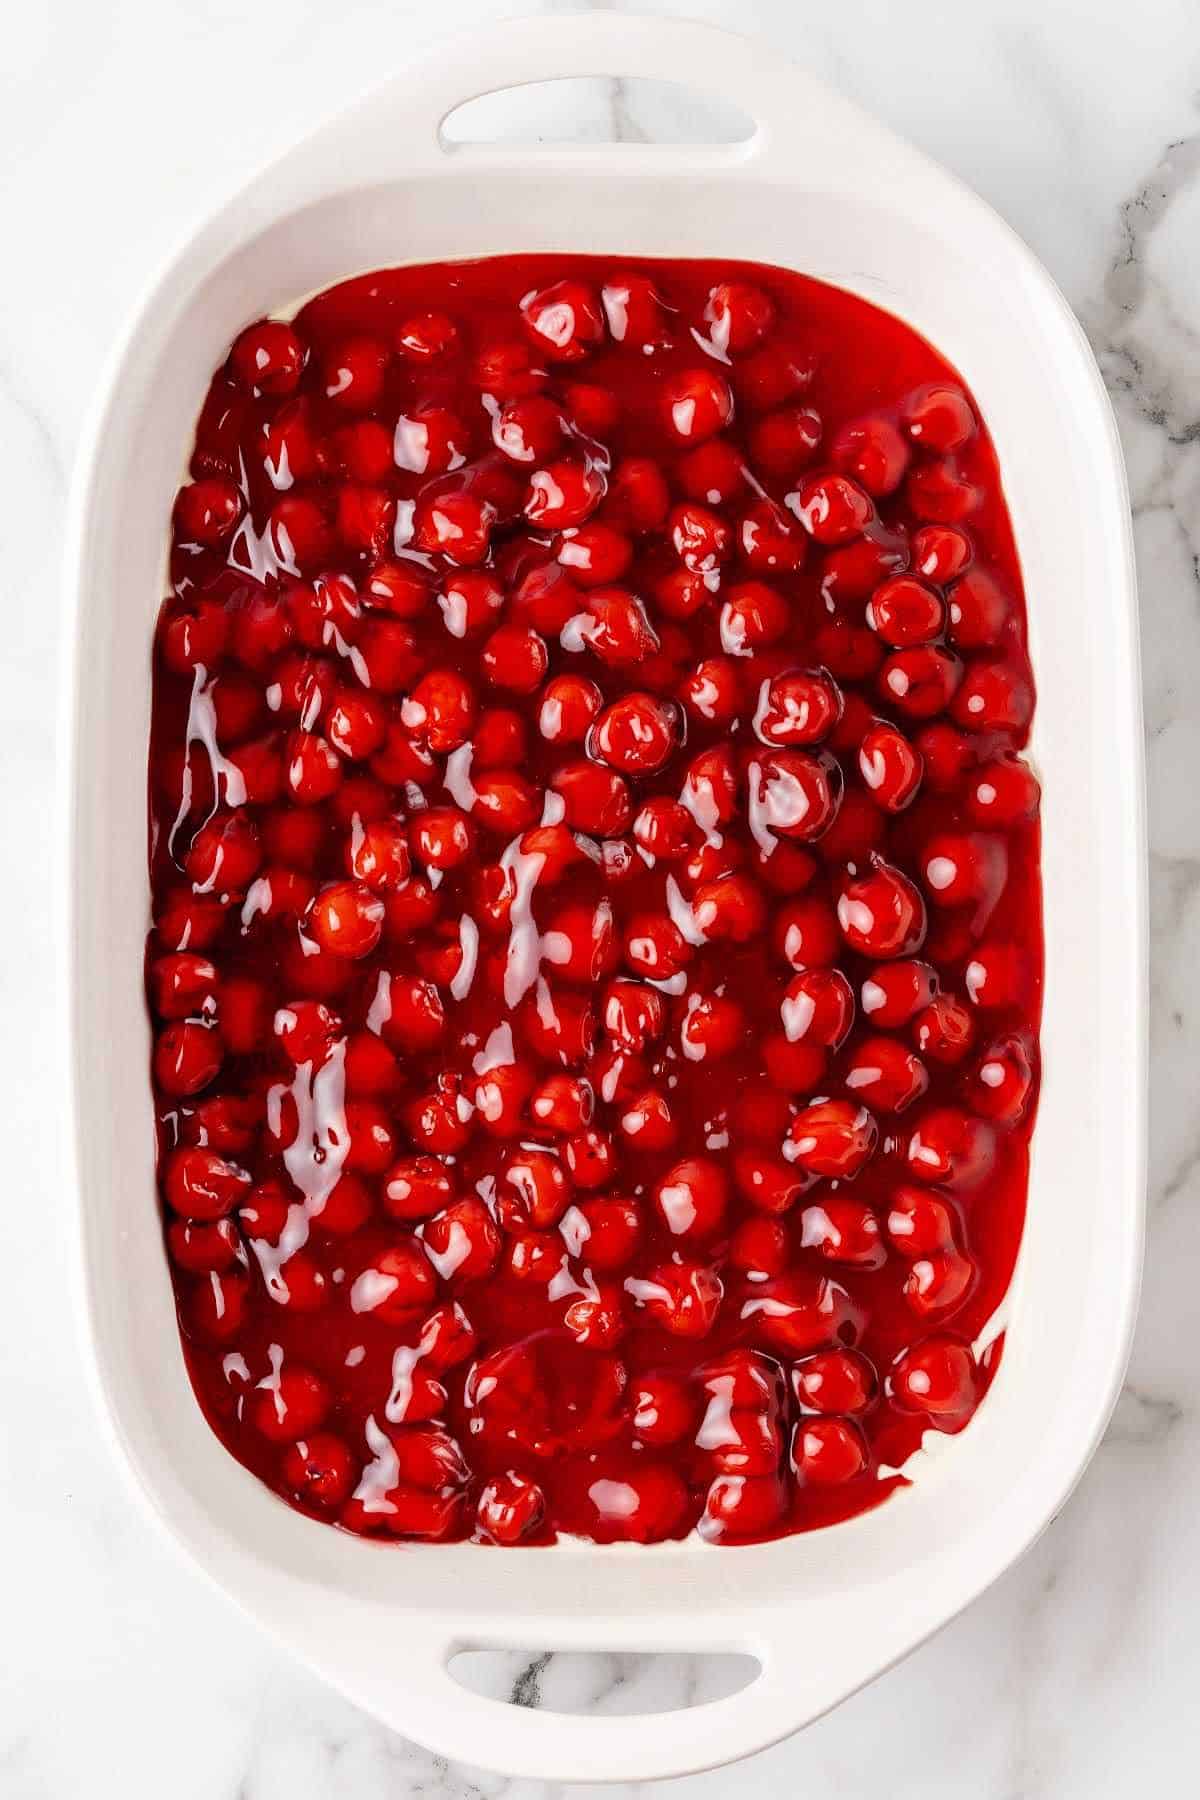 Cherry pie filling in a white rectangular dish on a white marble surface.